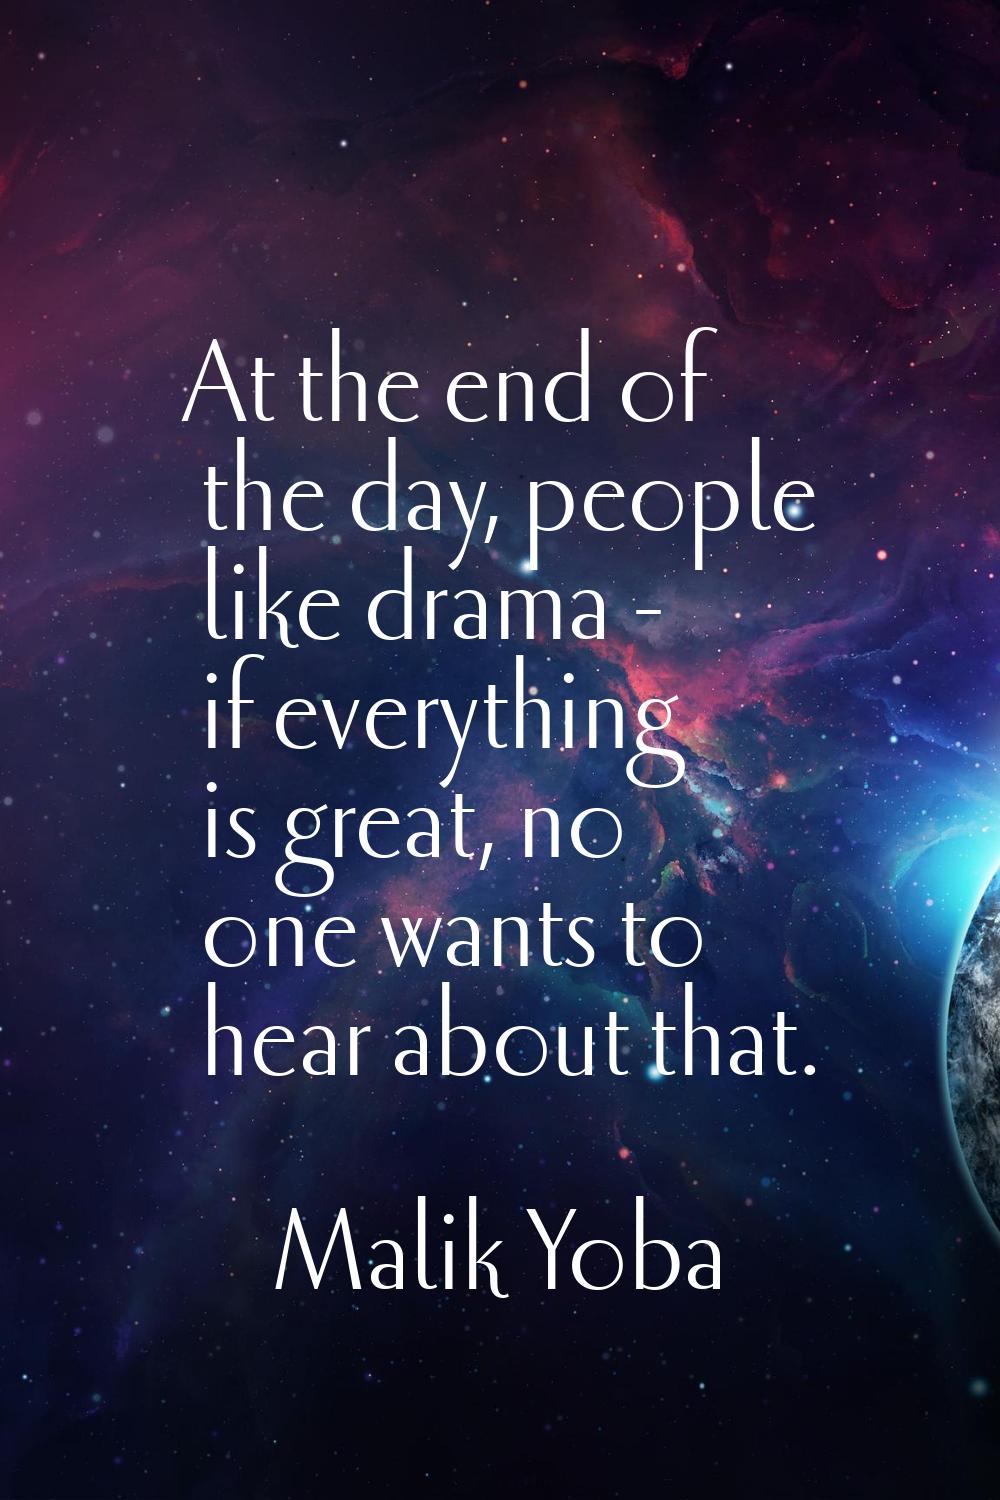 At the end of the day, people like drama - if everything is great, no one wants to hear about that.